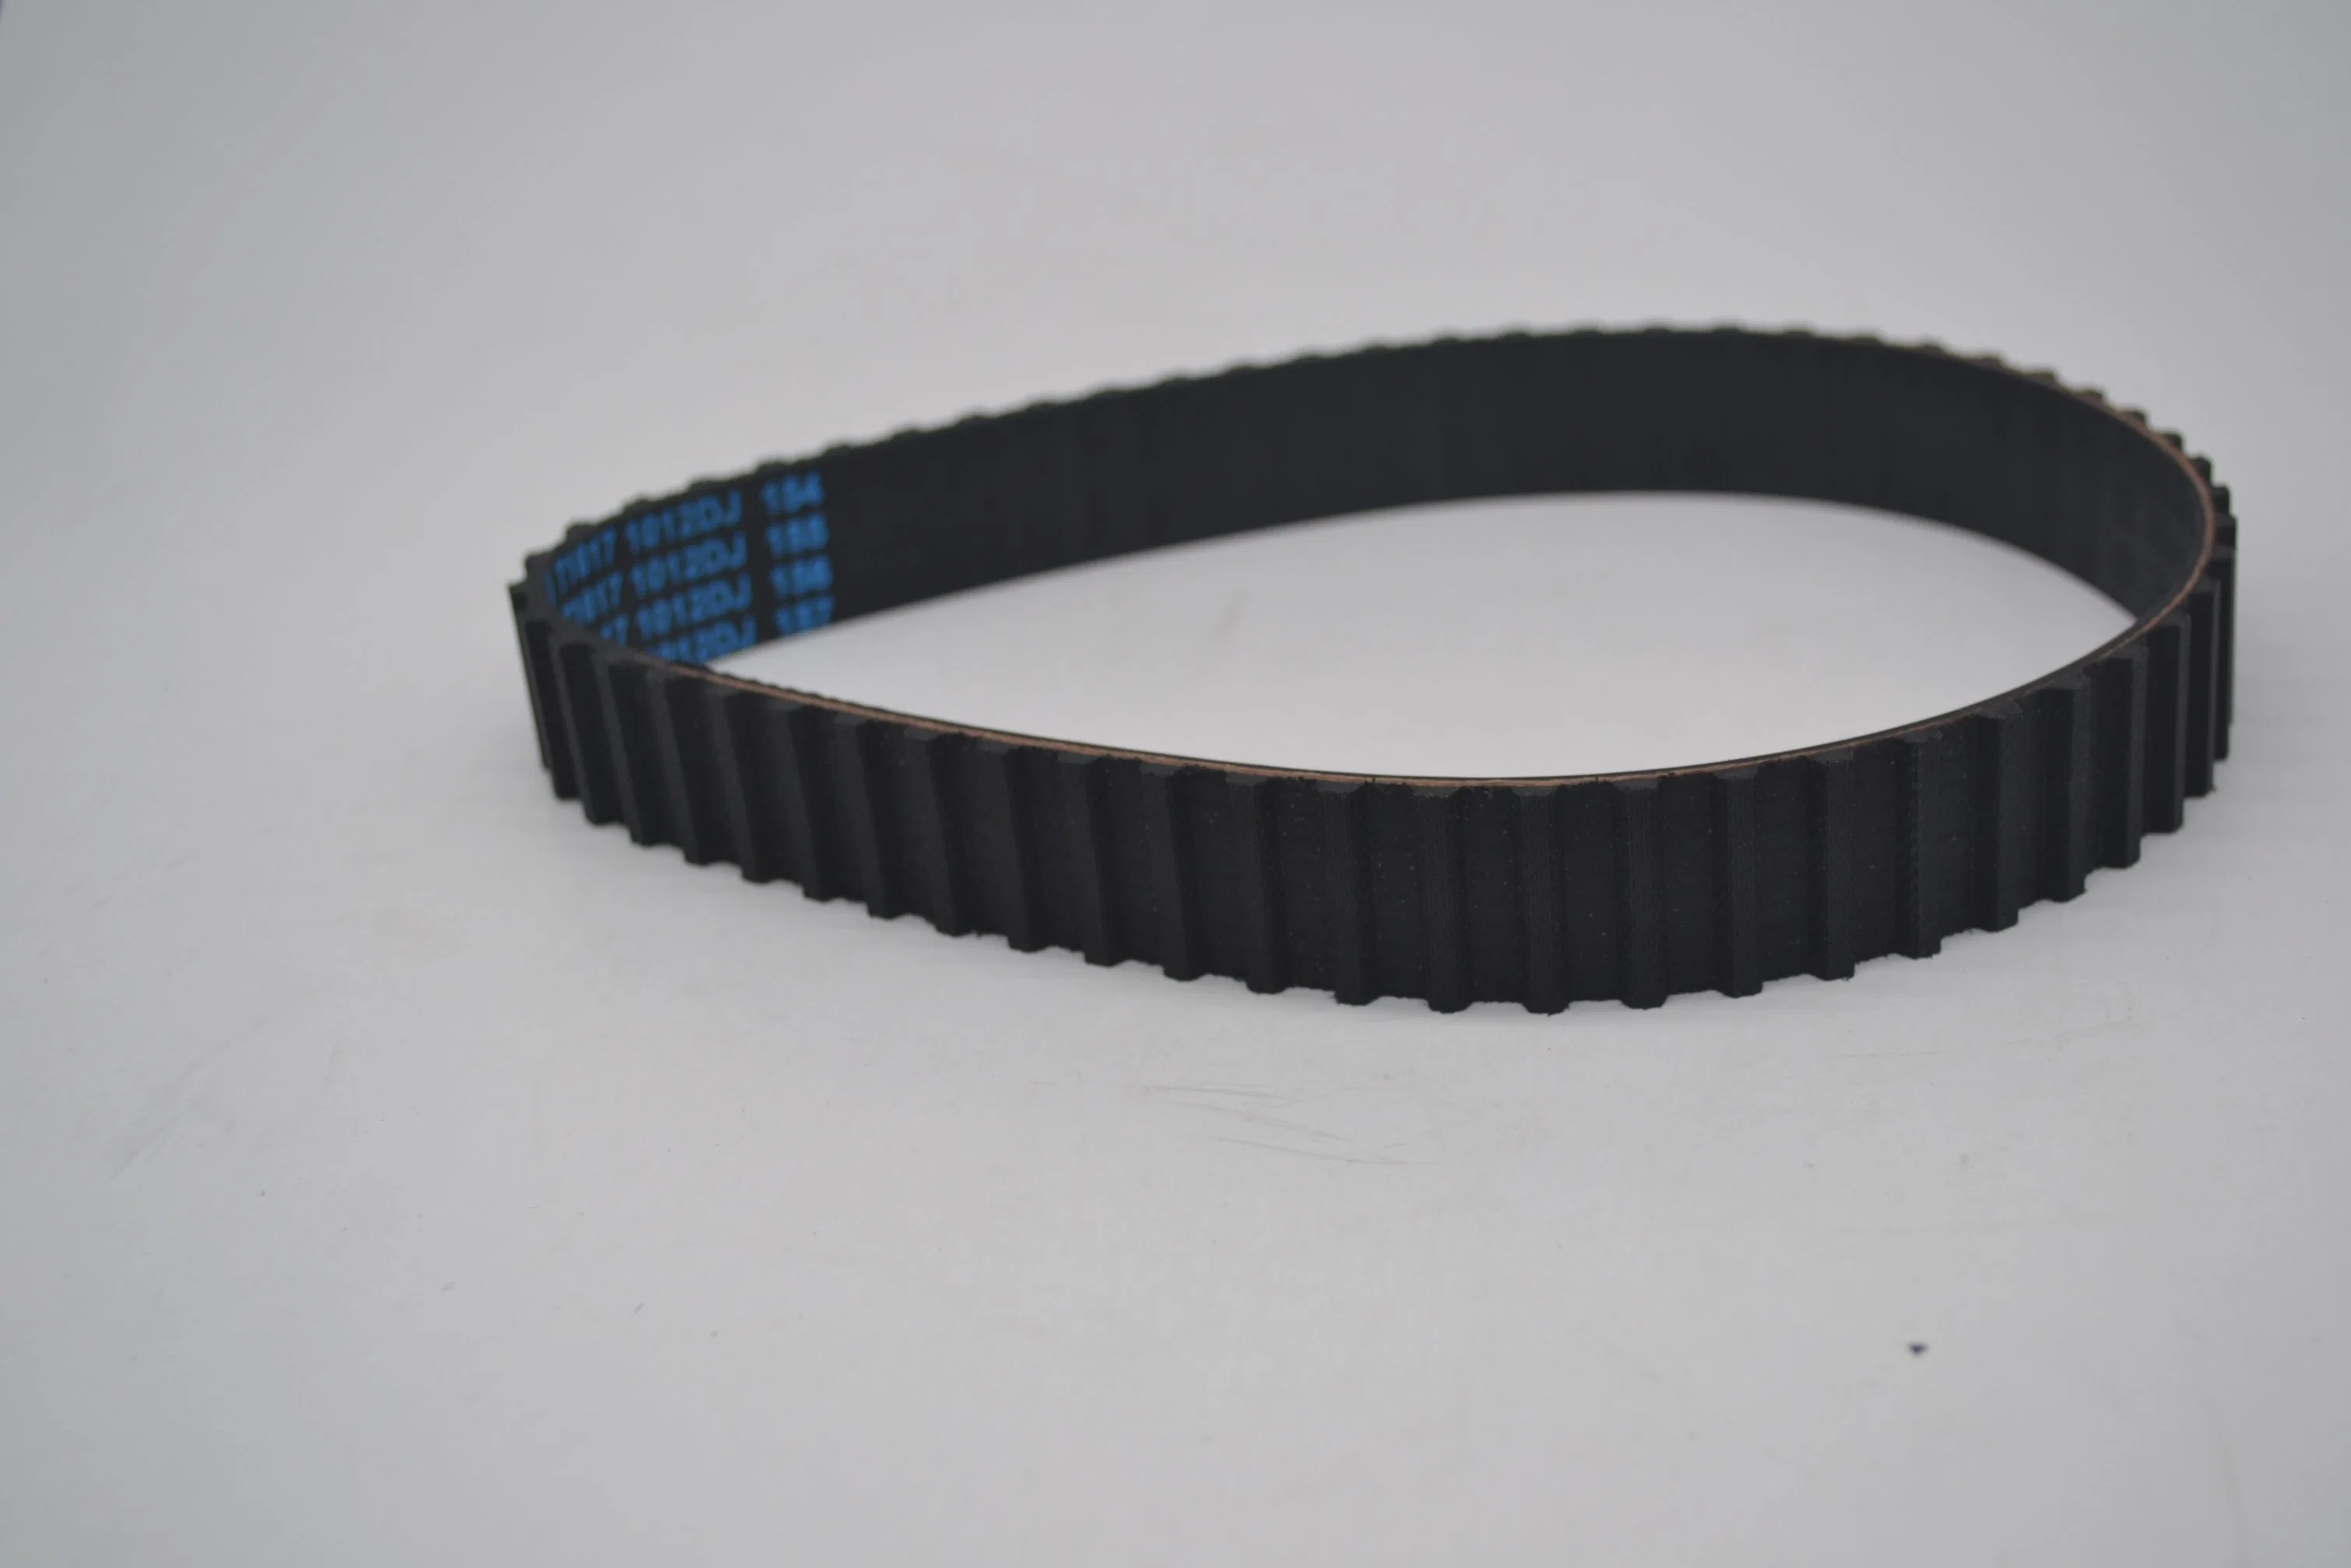 T10 Synchronization Customized Teeth Rubber Timing Bands for Electronic Accessories and Agricultural Printing Machine